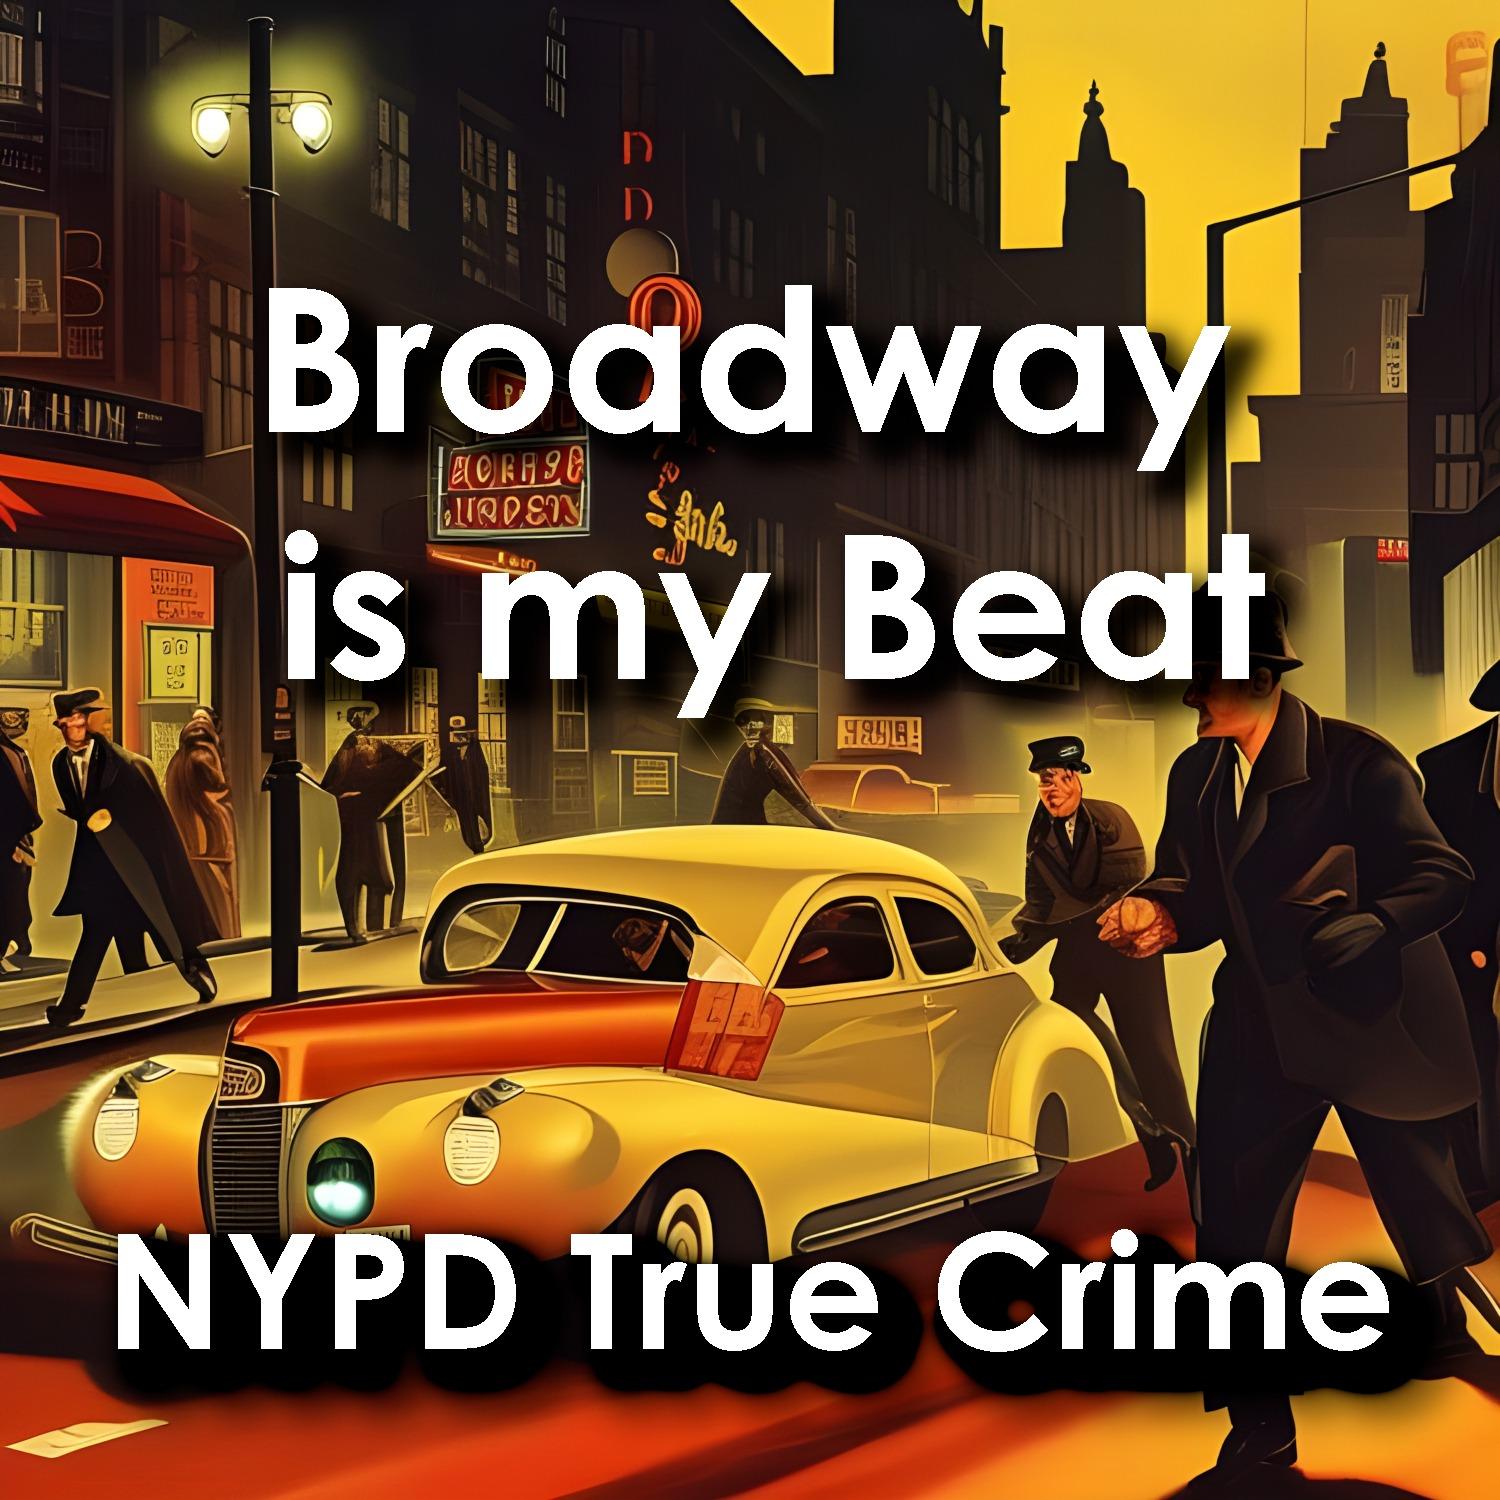 Broadway is my Beat: Crime in New York's Gritty Underworld